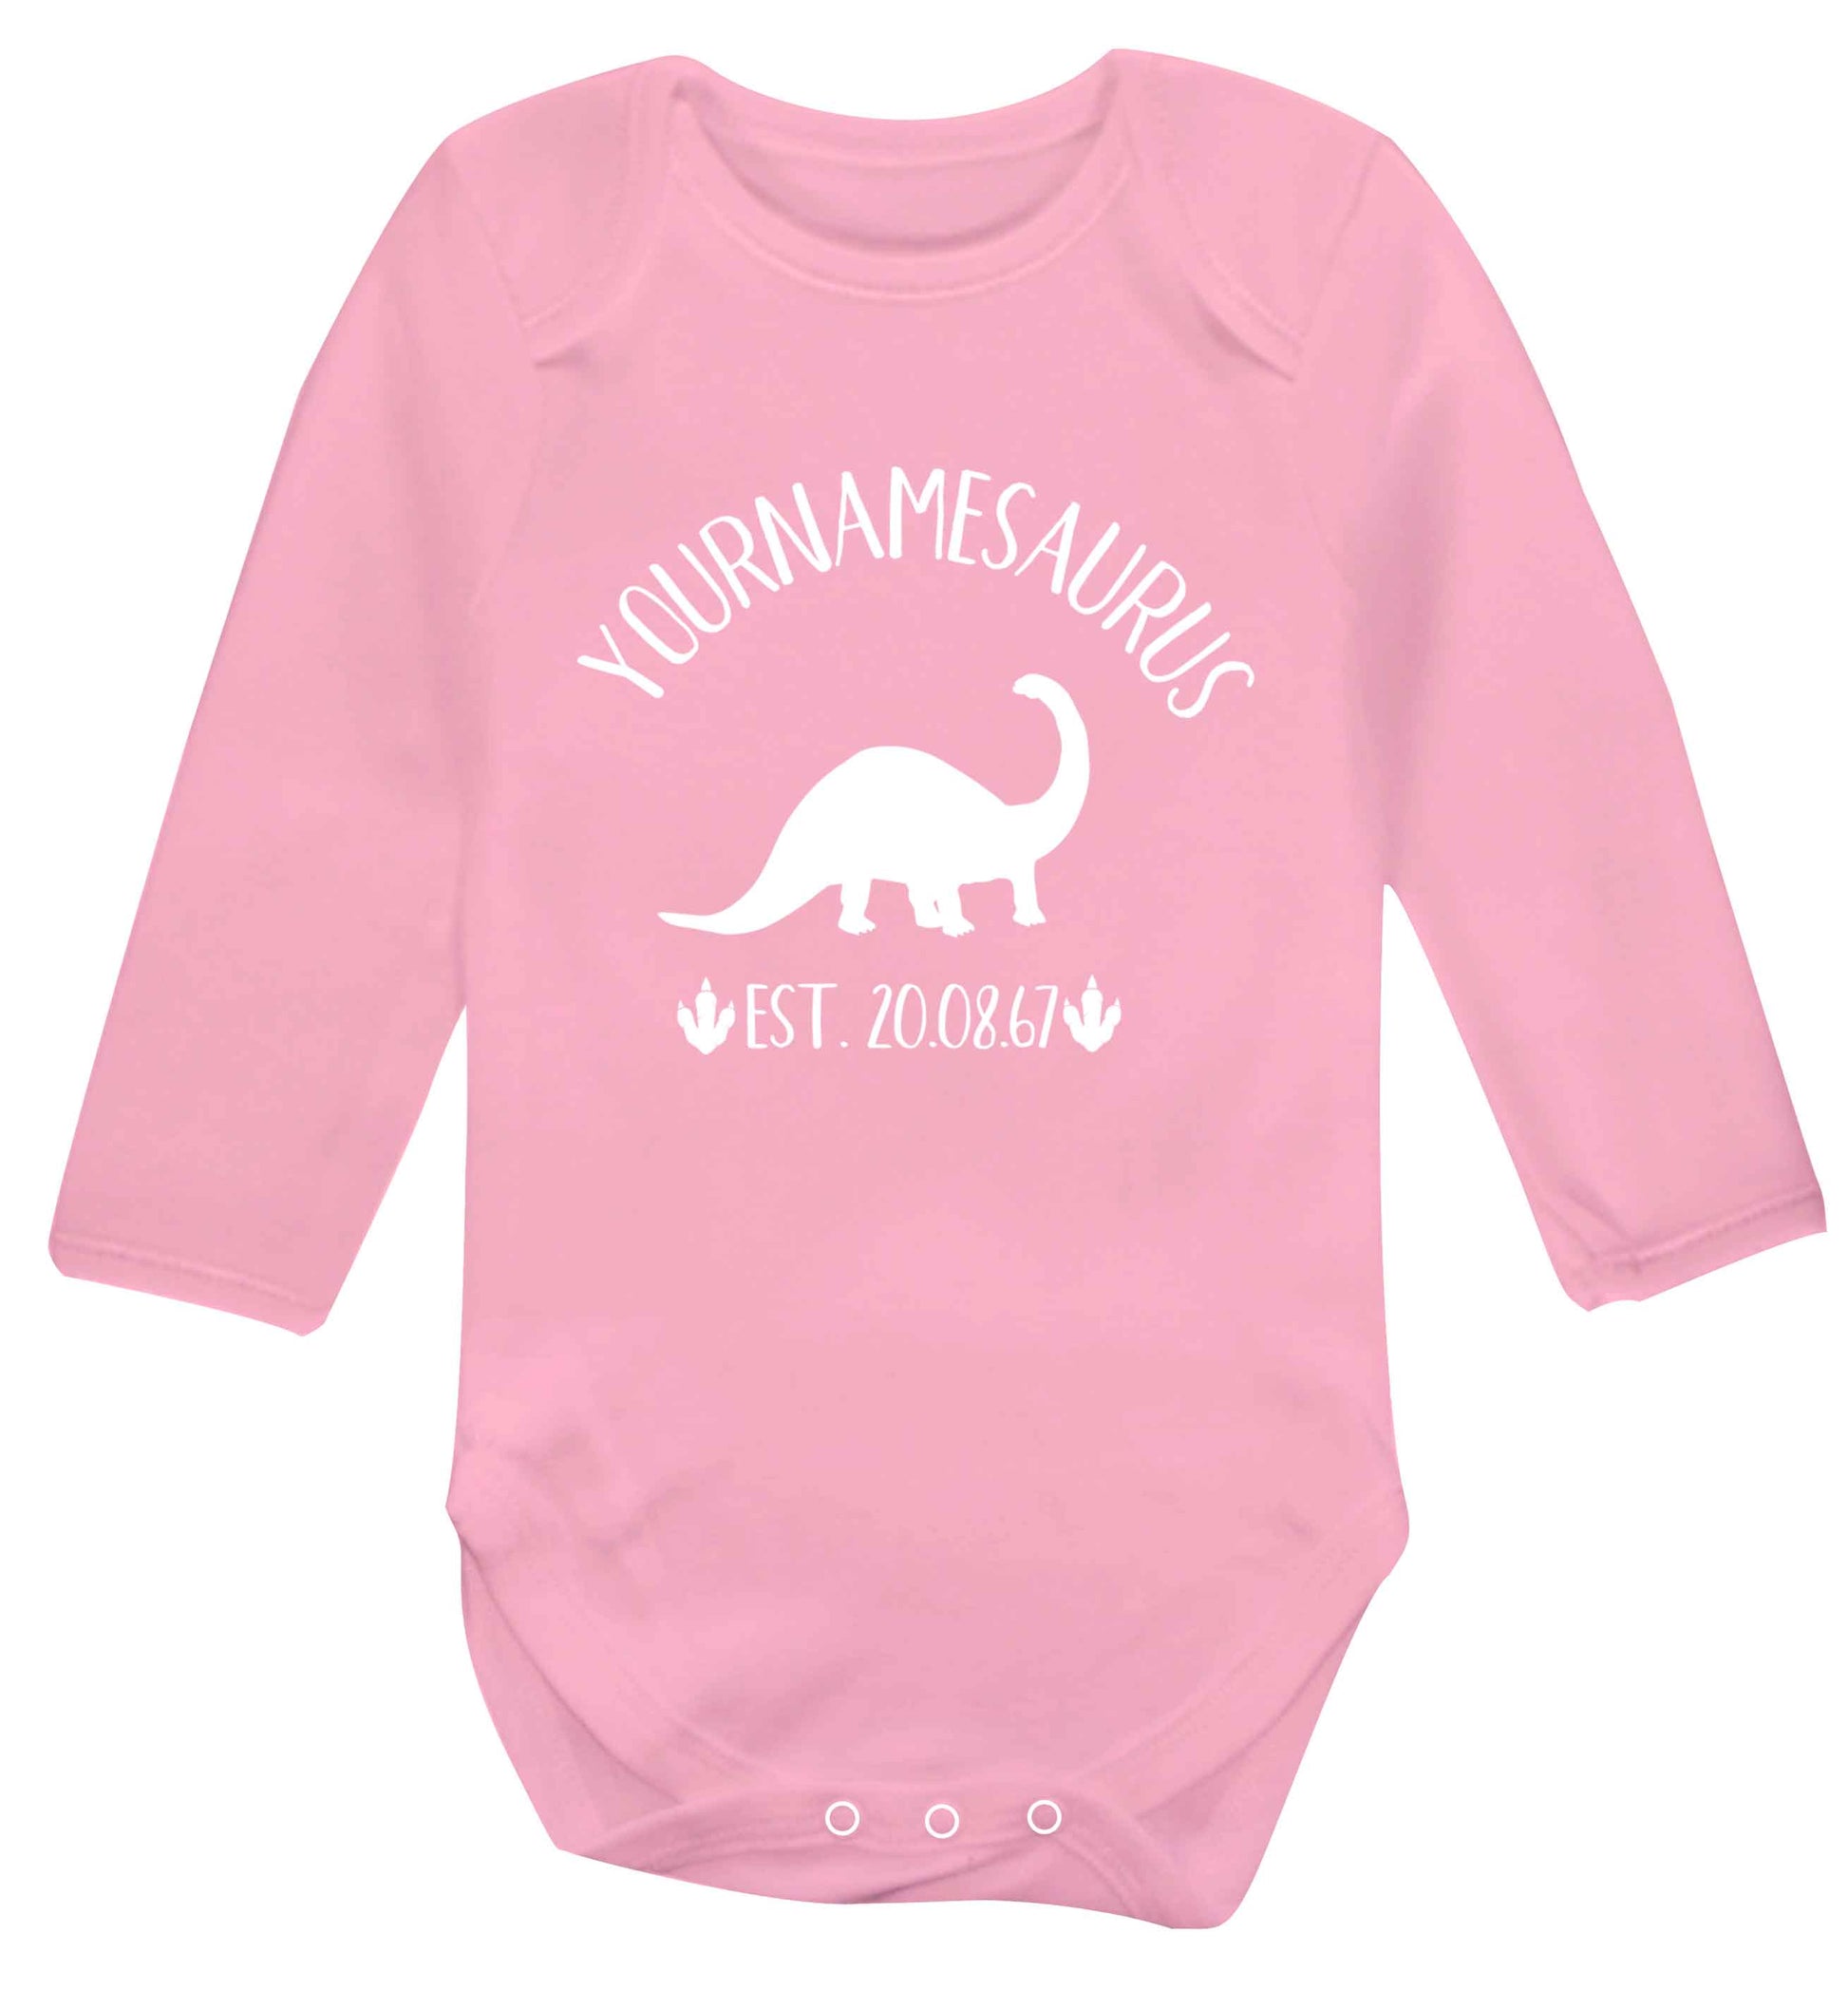 Personalised (your name) dinosaur birthday Baby Vest long sleeved pale pink 6-12 months